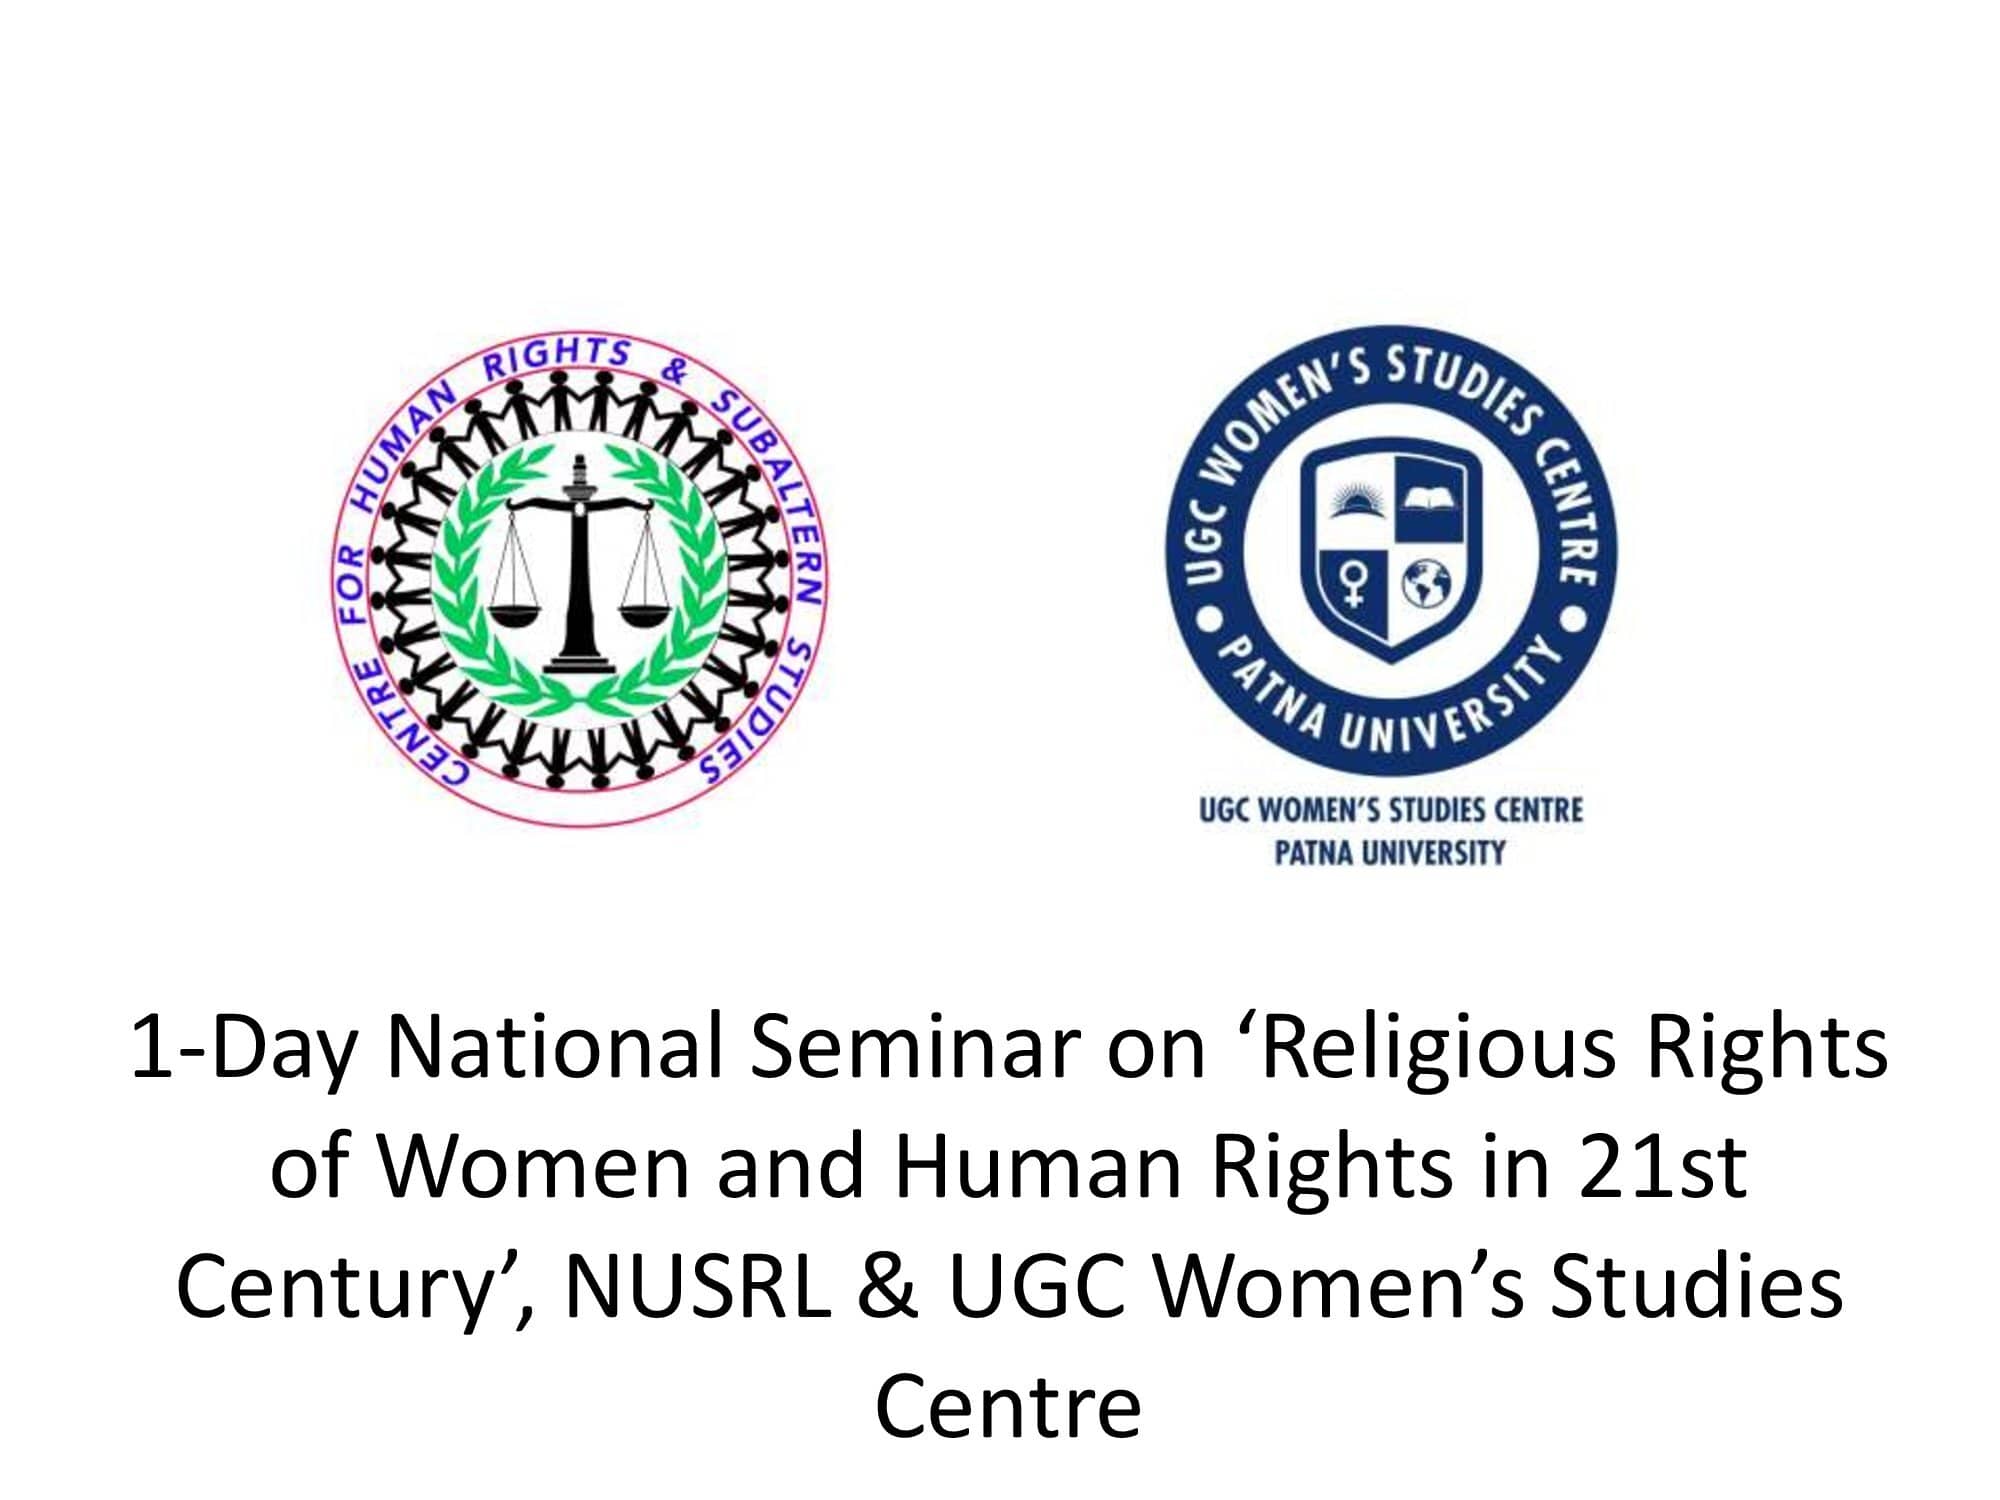 1-Day National Seminar on ‘Religious Rights of Women and Human Rights in 21st Century’, NUSRL & UGC Women’s Studies Centre